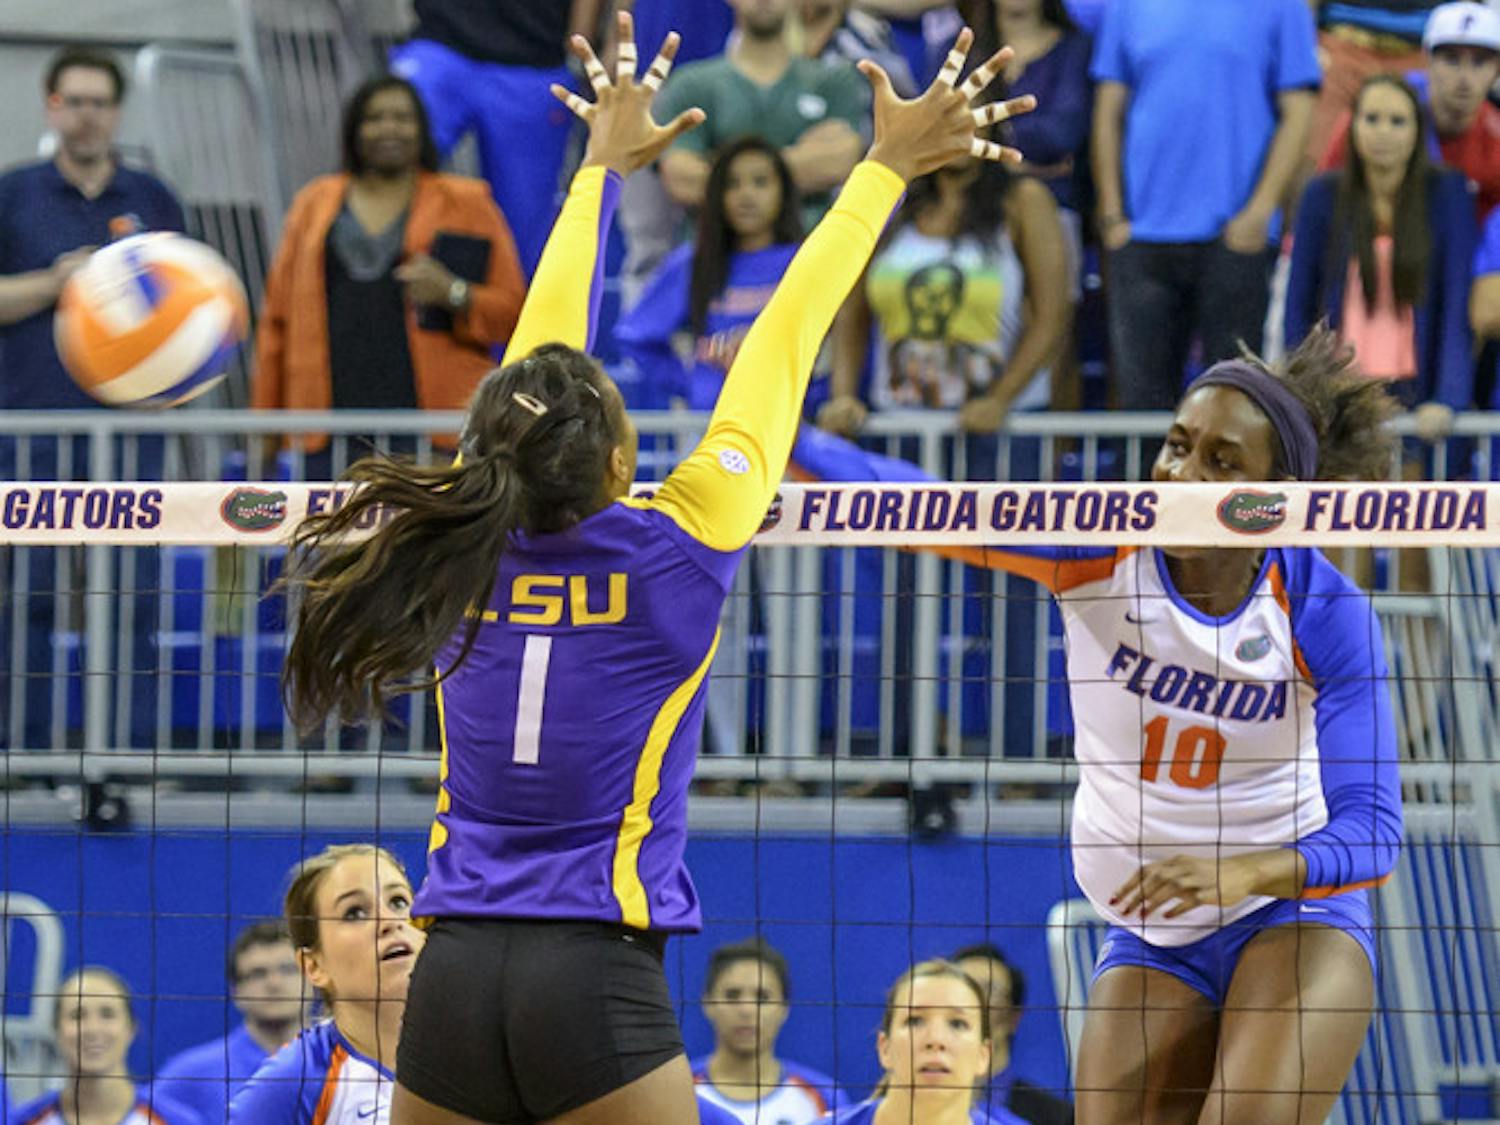 Redshirt senior middle blocker Chloe Mann spikes the ball, after a set-up by fellow senior Taylor Brauneis, for the match-winning kill during No. 7 Florida's sweep of LSU on Friday night in the O'Connell Center.